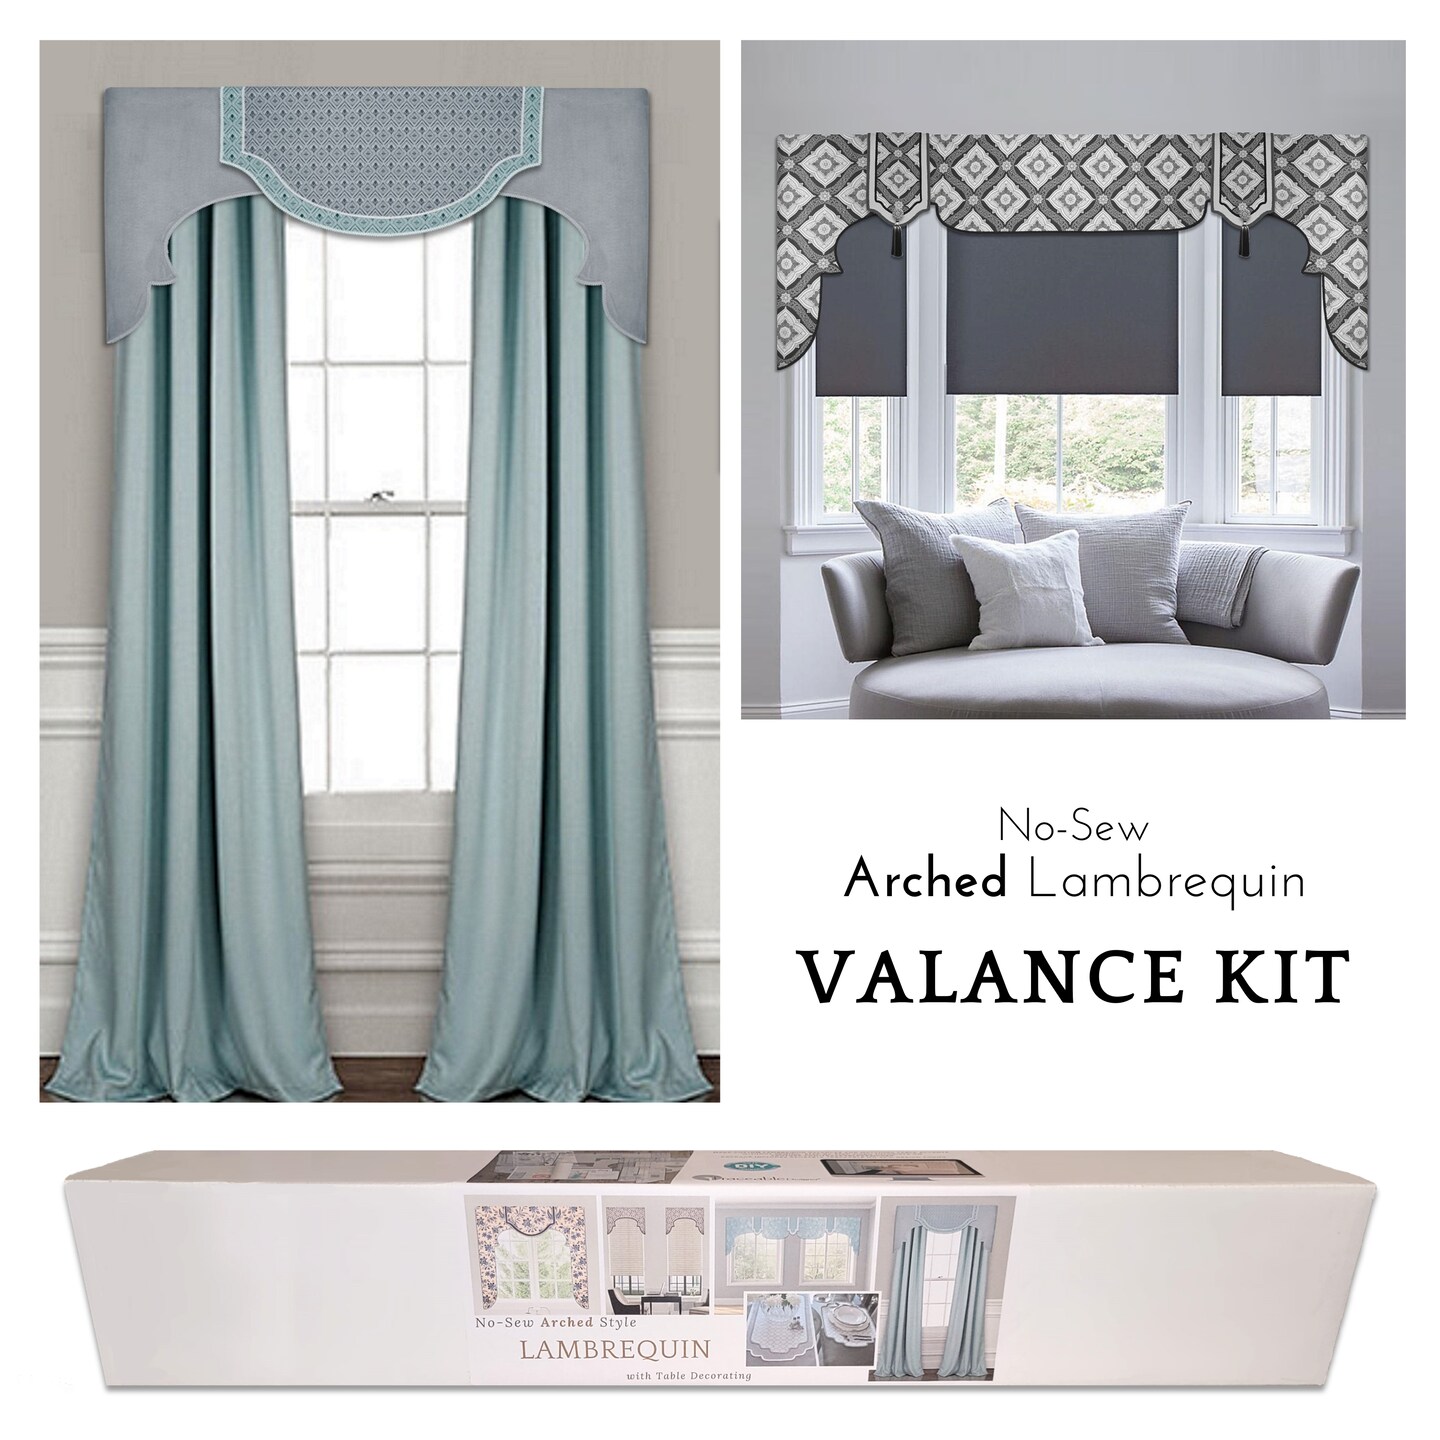 Arched Lambrequin Cornice-Valance Kit for No-Sew Window Decorating